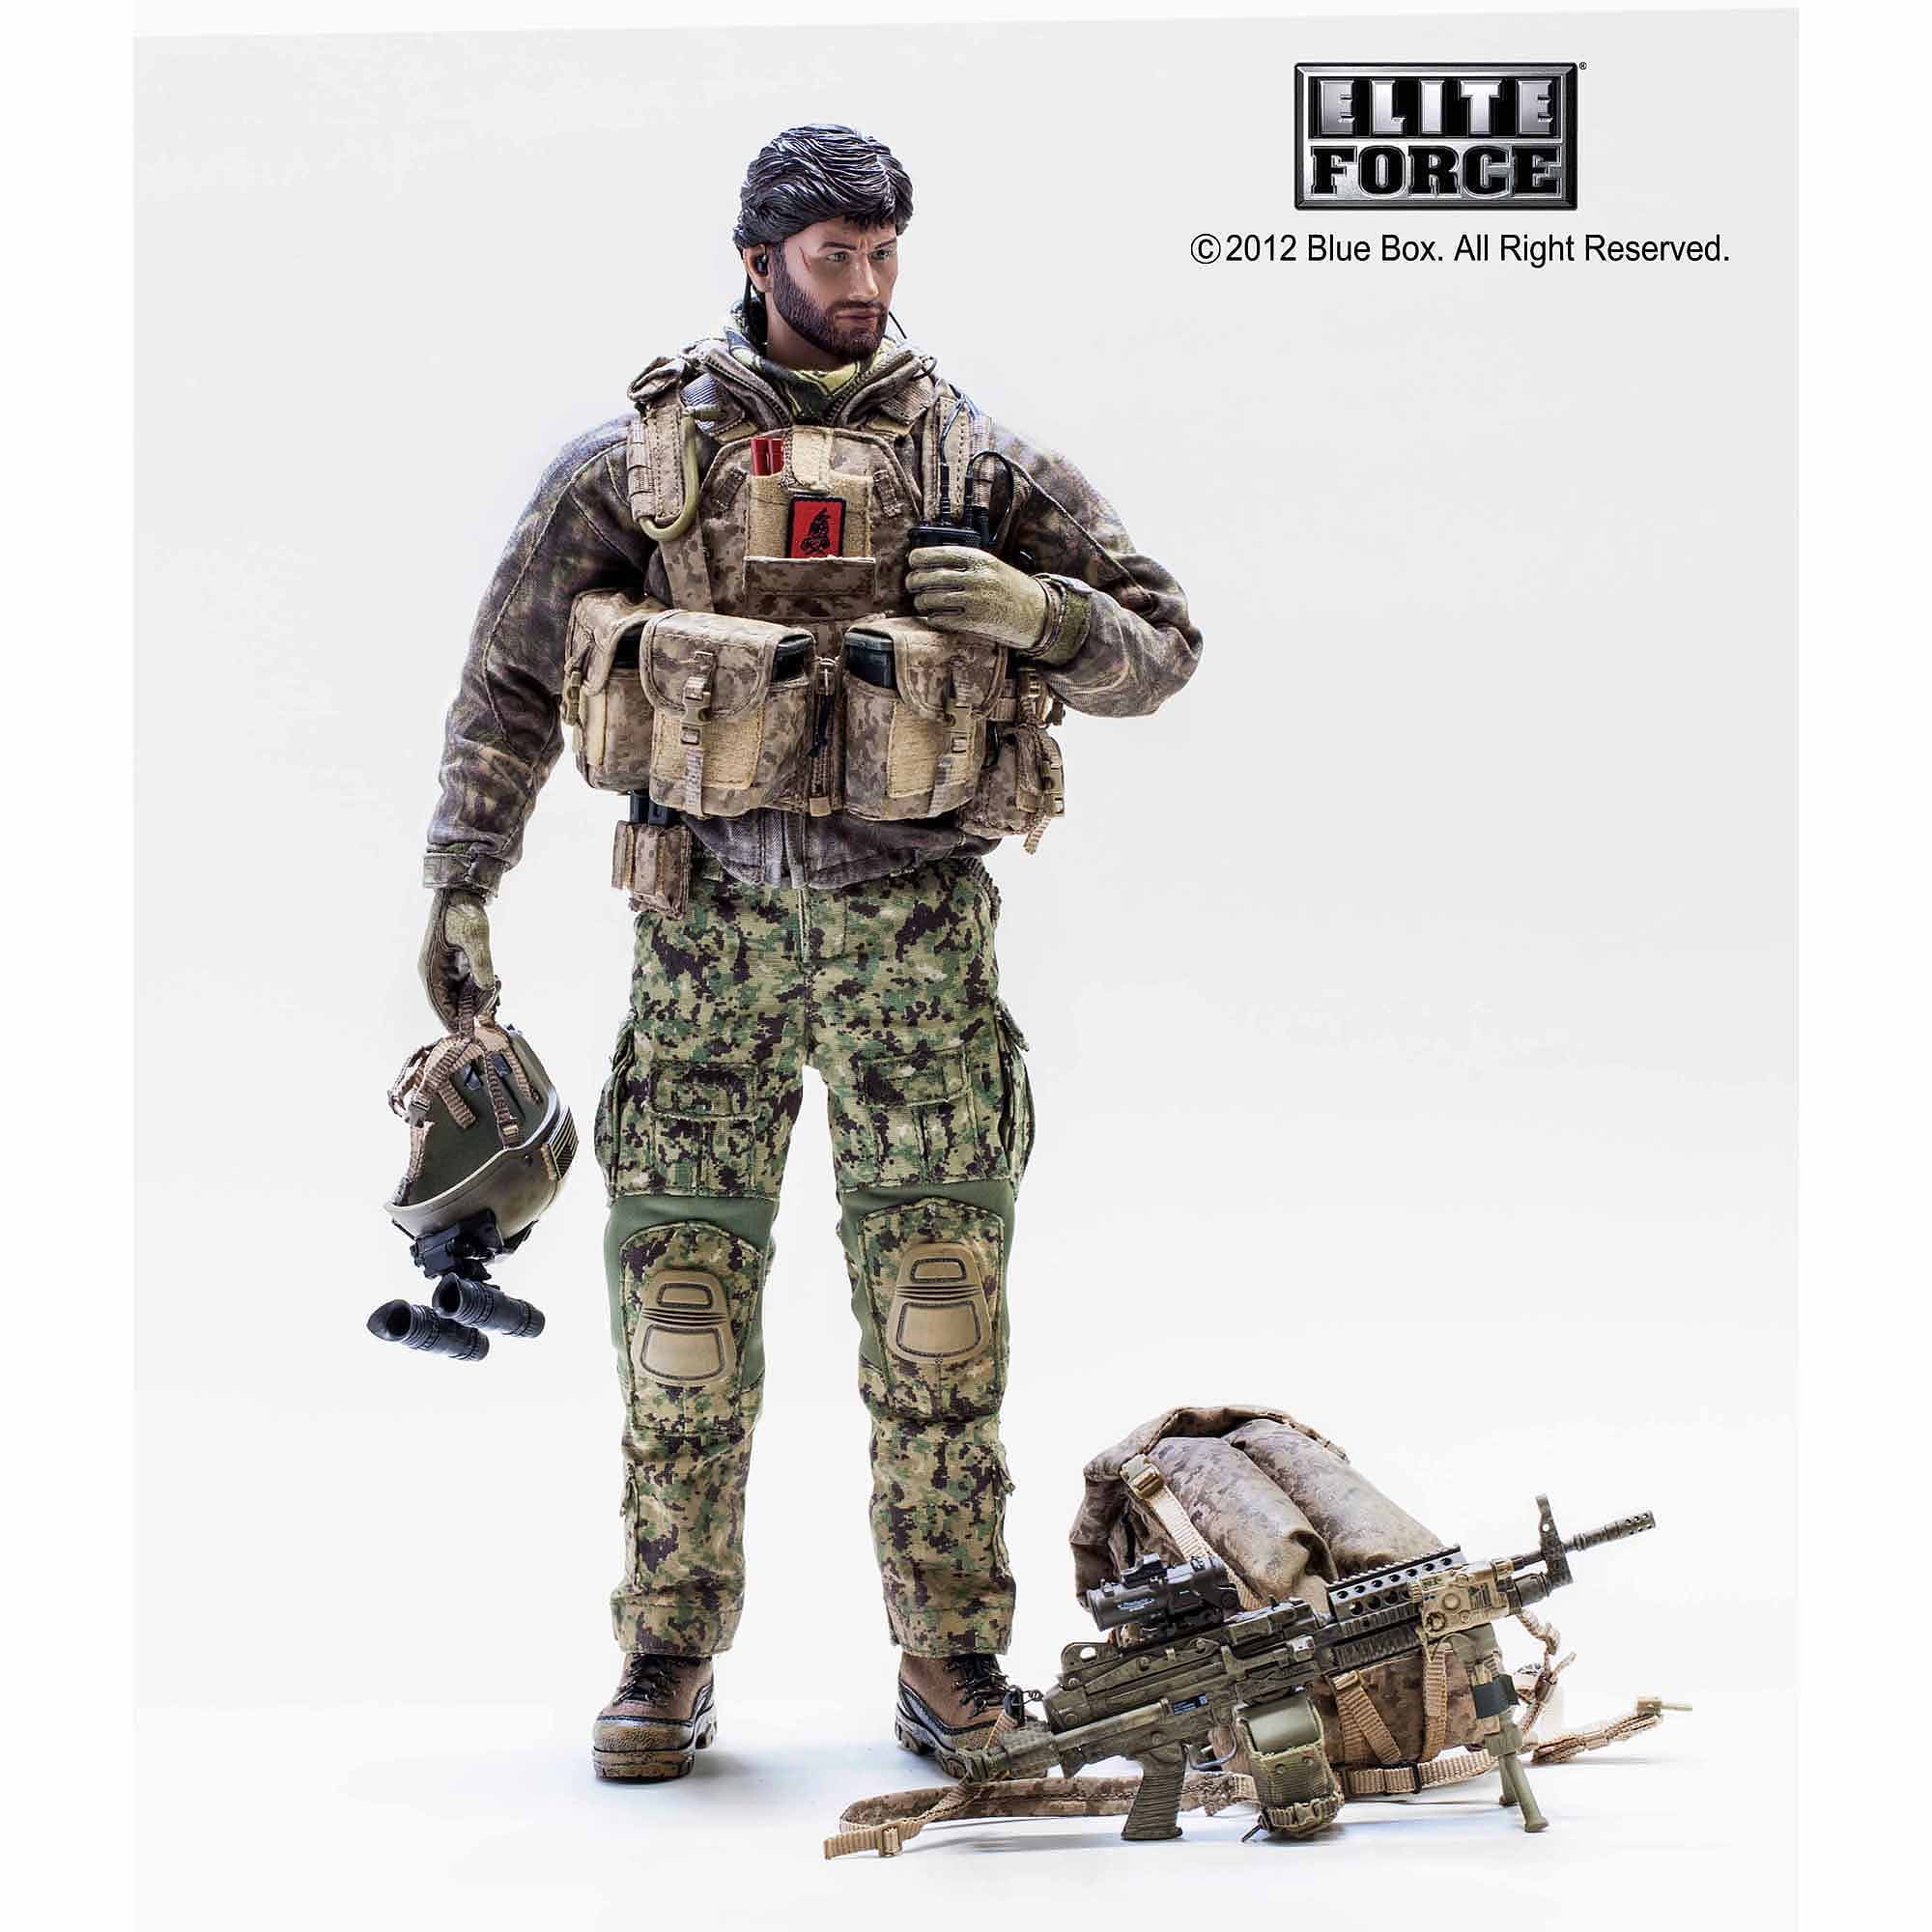 Details about   1:18 BBI Elite Force U.S Navy SEAL DEVGRU Night Ops with MP5A3 Weapon Figure 4" 